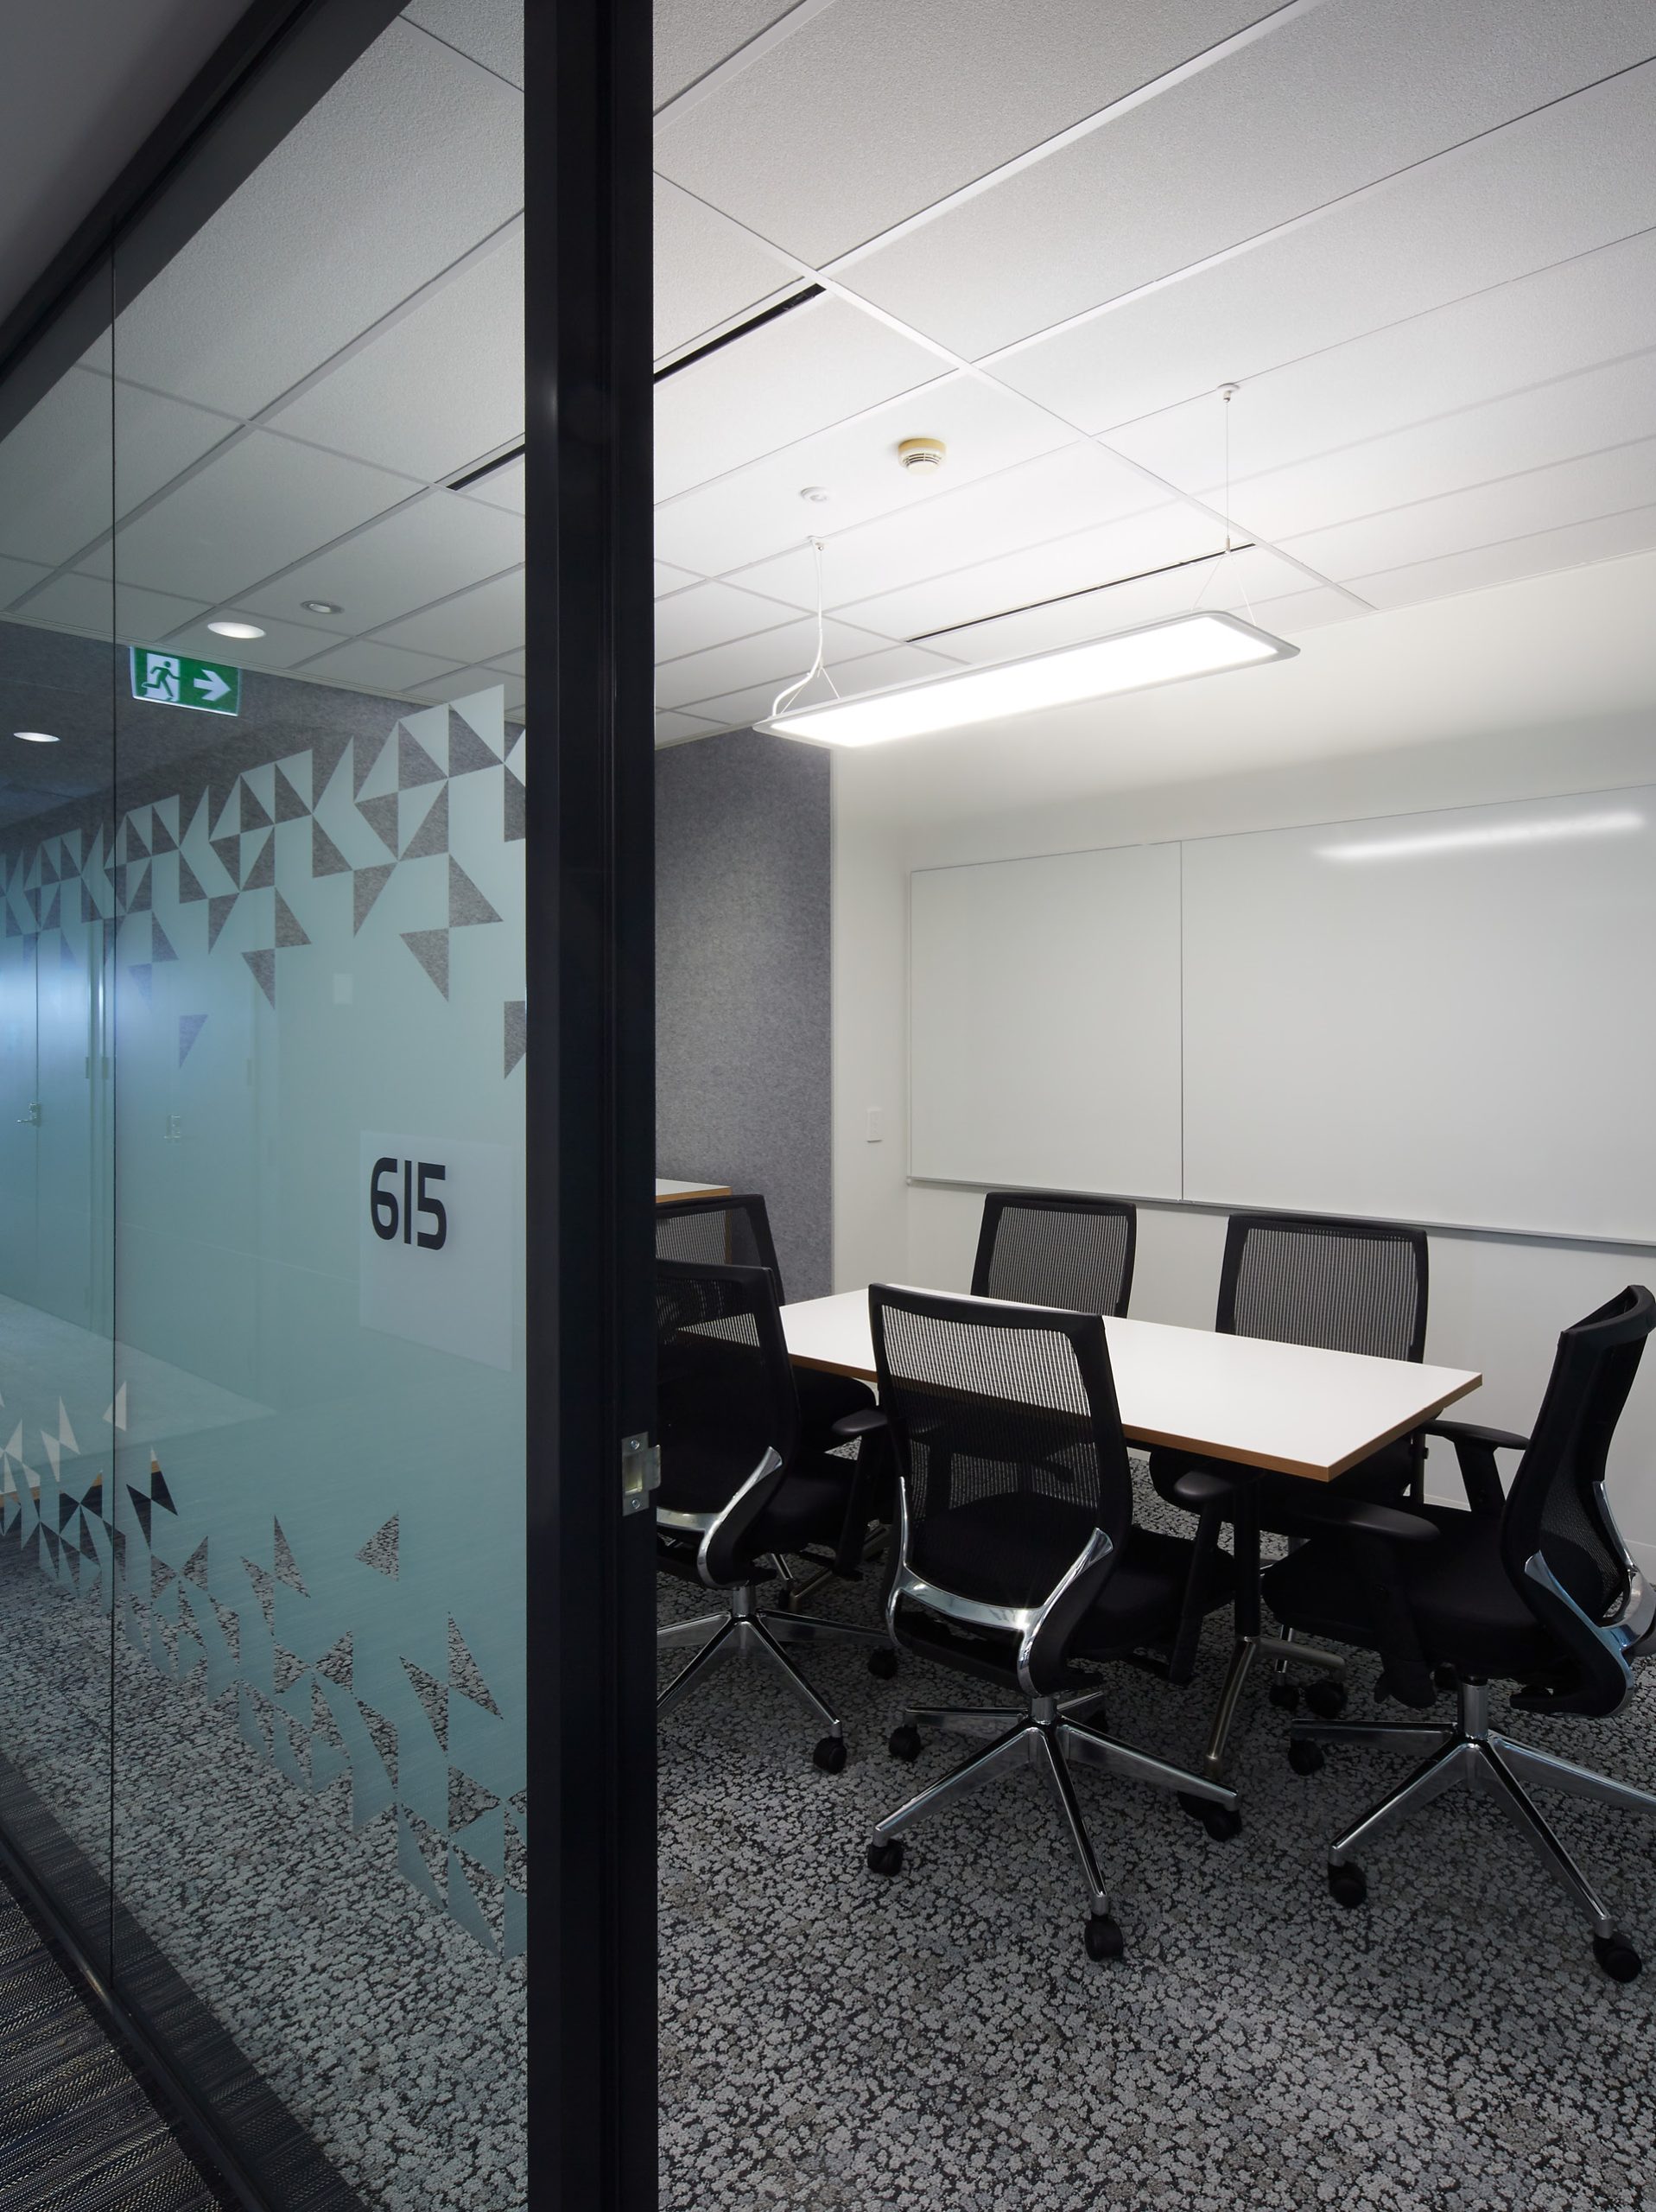 6 small meeting room breakout space australian institute of health innovation taylor construction education fitout